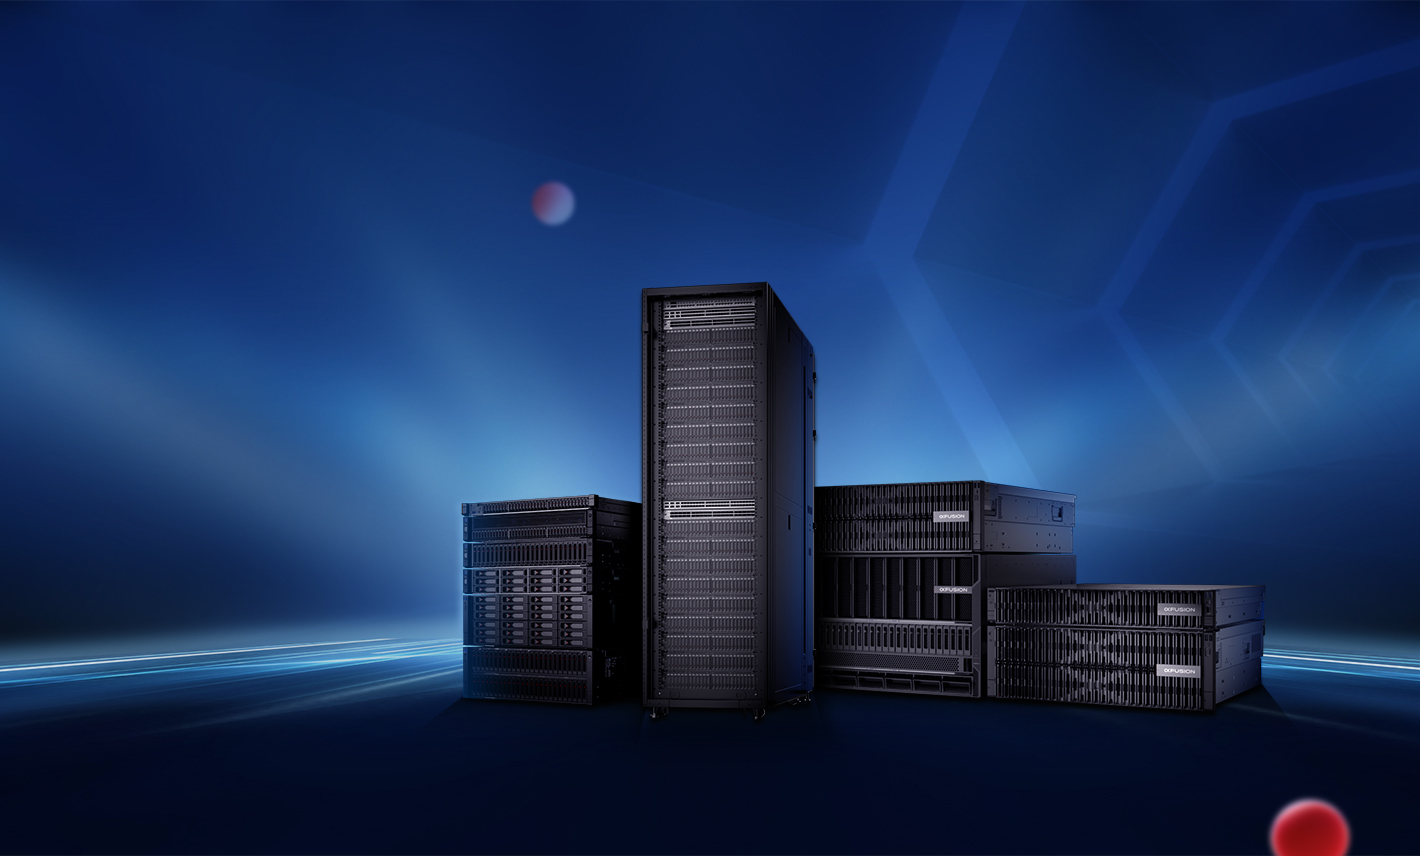 xFusion Launches the Next-Generation FusionServer V7 and FusionPoD Rack-Scale Servers